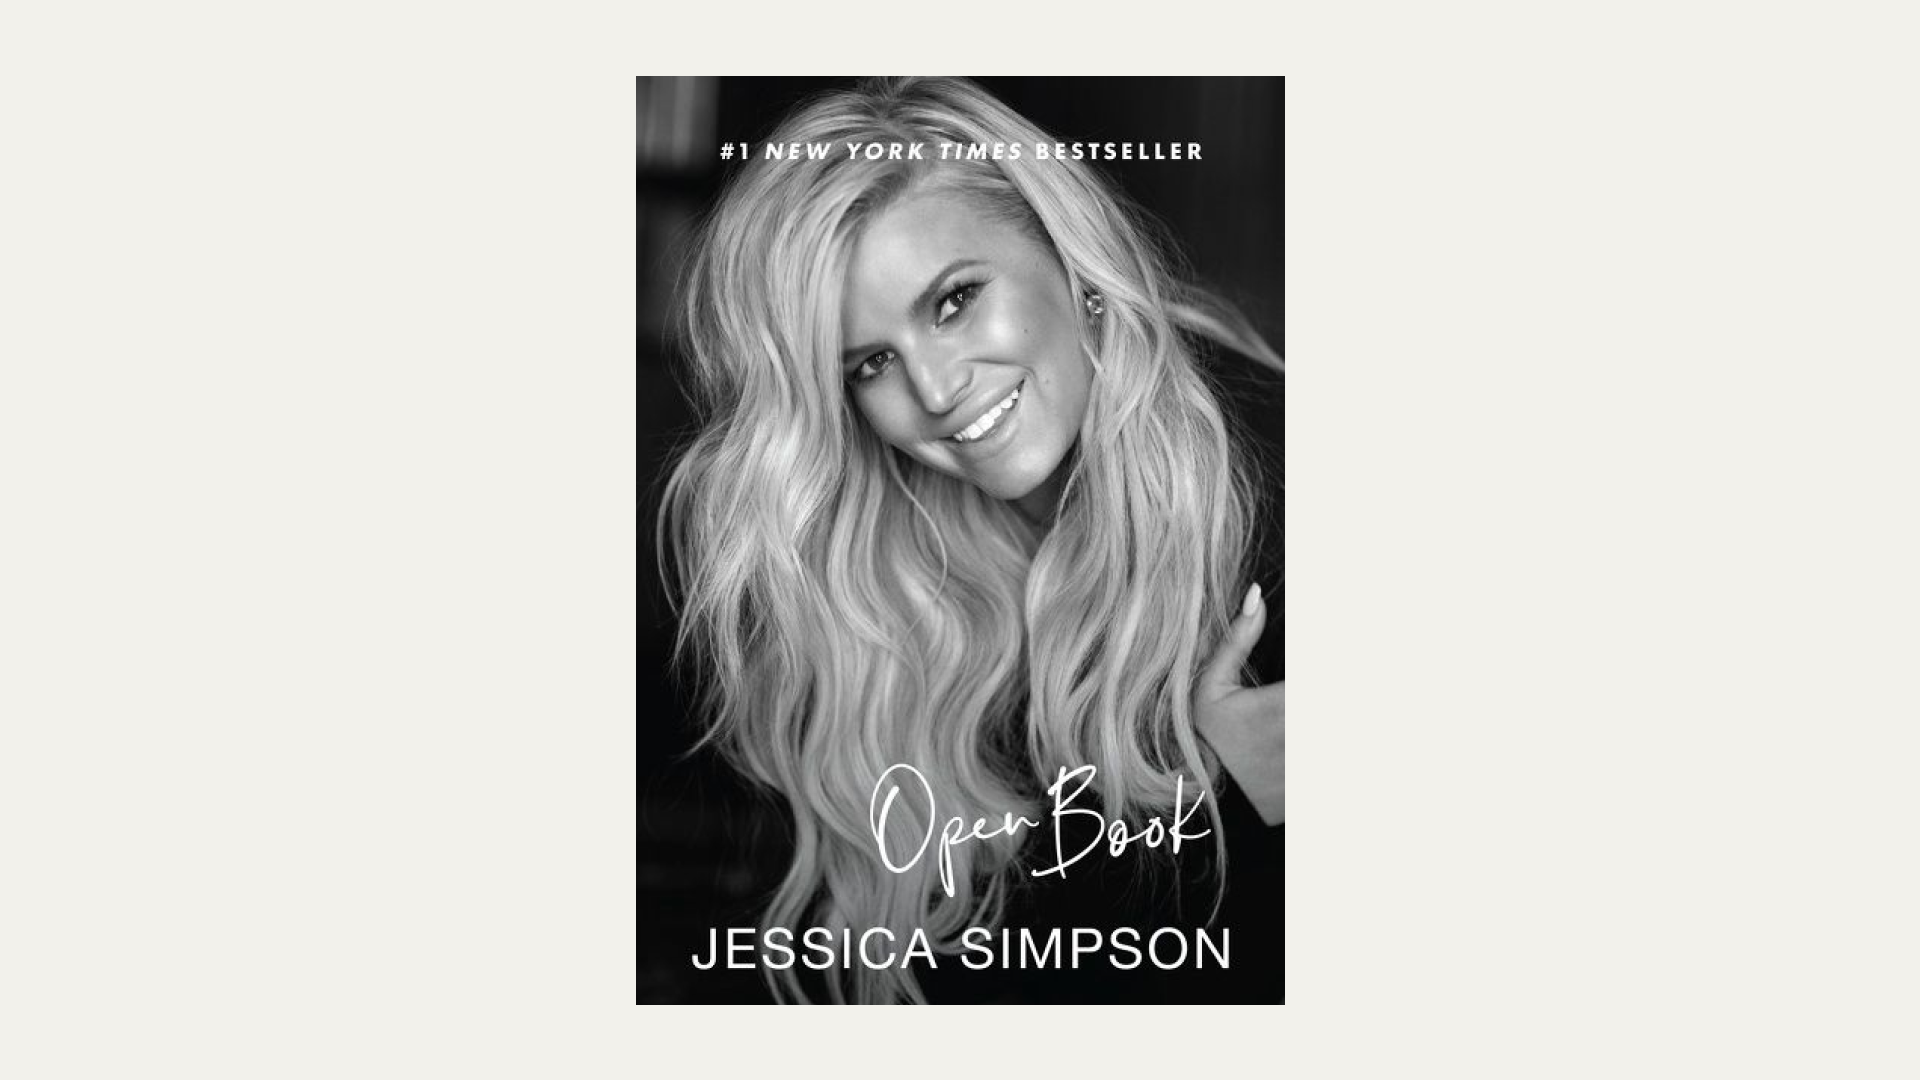 “Open Book” by Jessica Simpson 